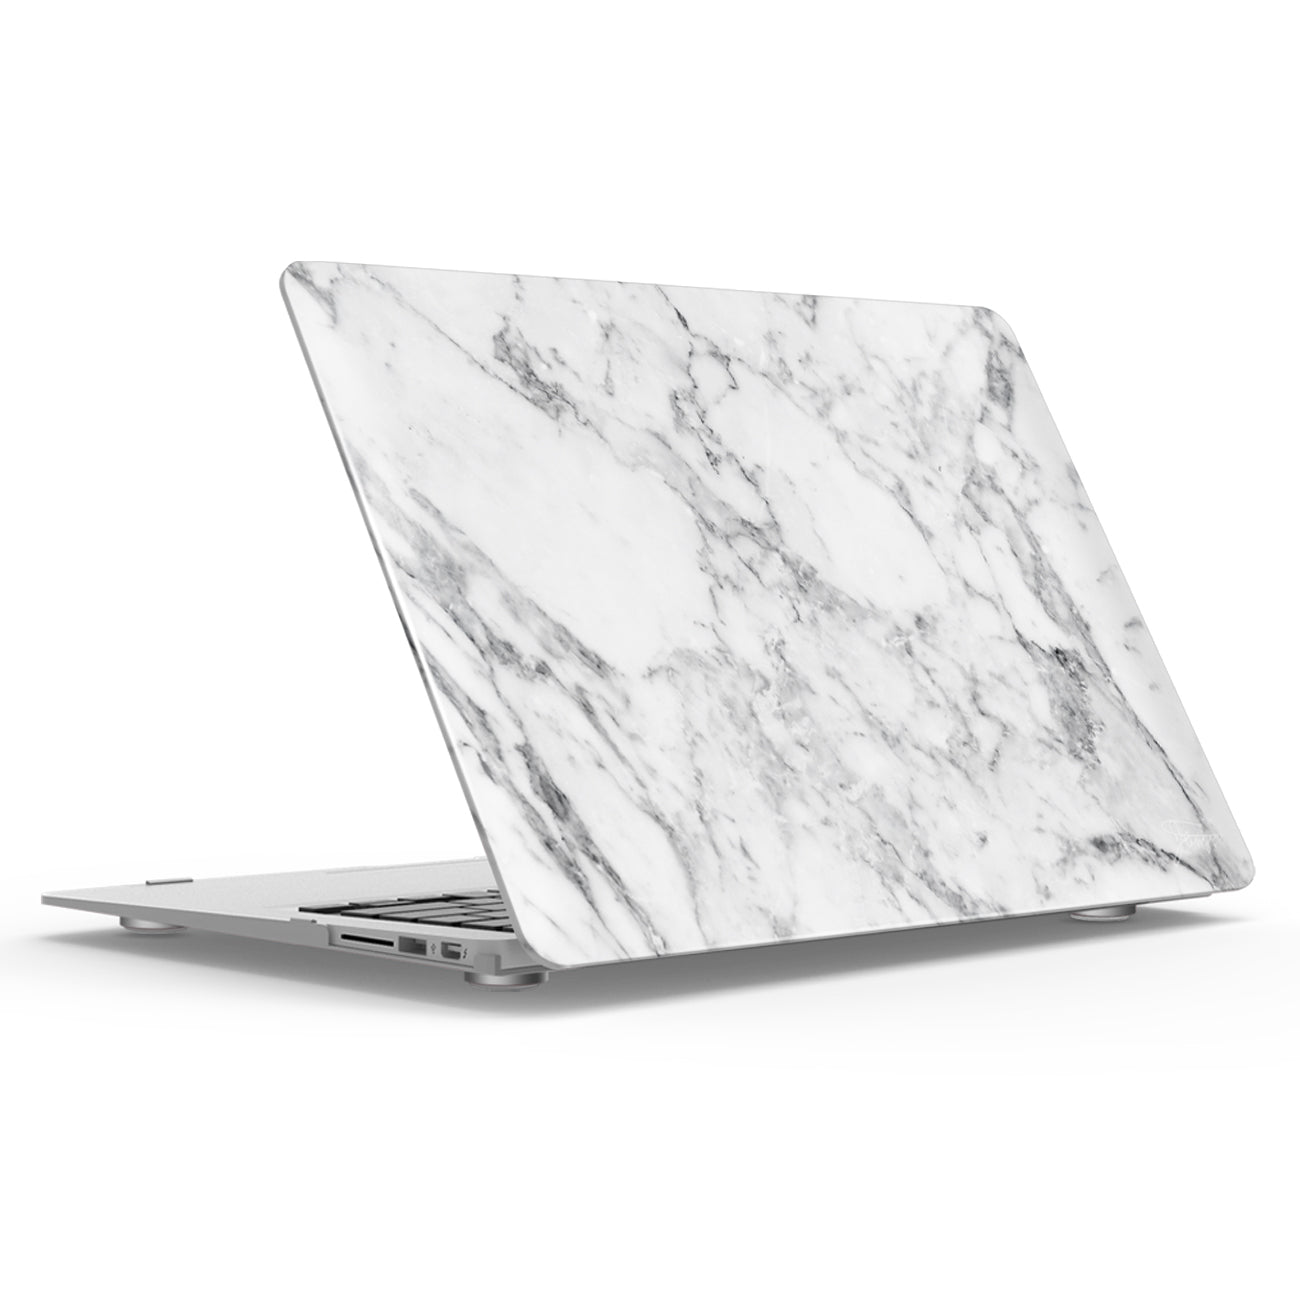 Superior iBenzer Neon Party Macbook Air 13“ White Marble case For old Air 13, not 2018 Air